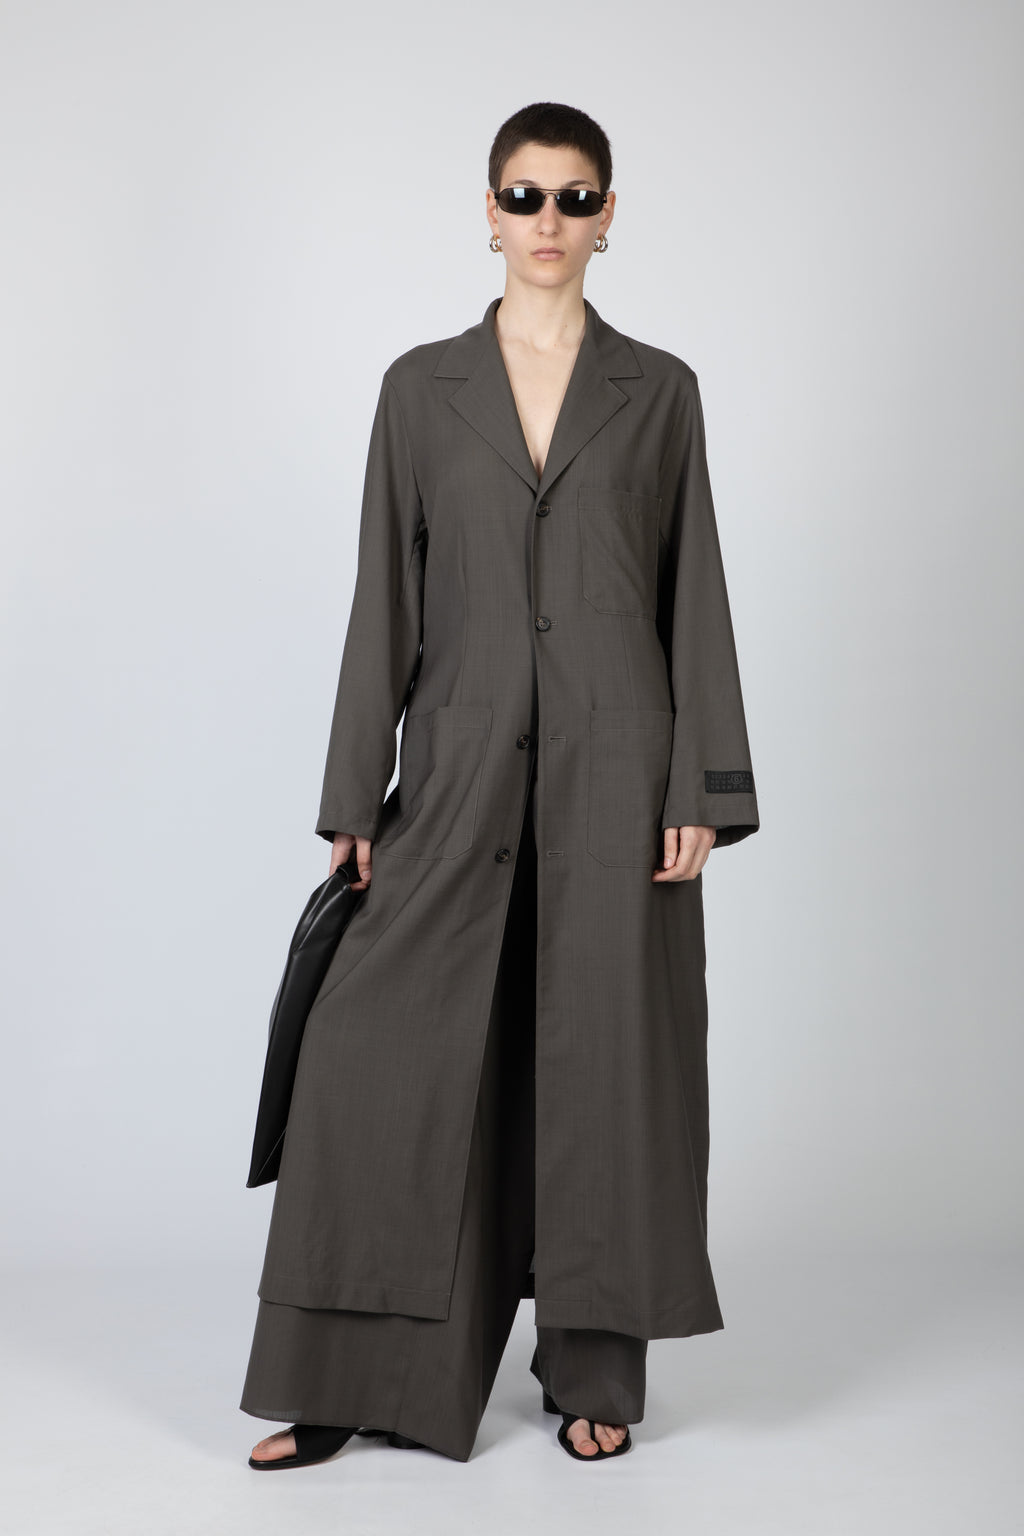 alt-image__Dove-brown-unlined-long-coat-with-pockets